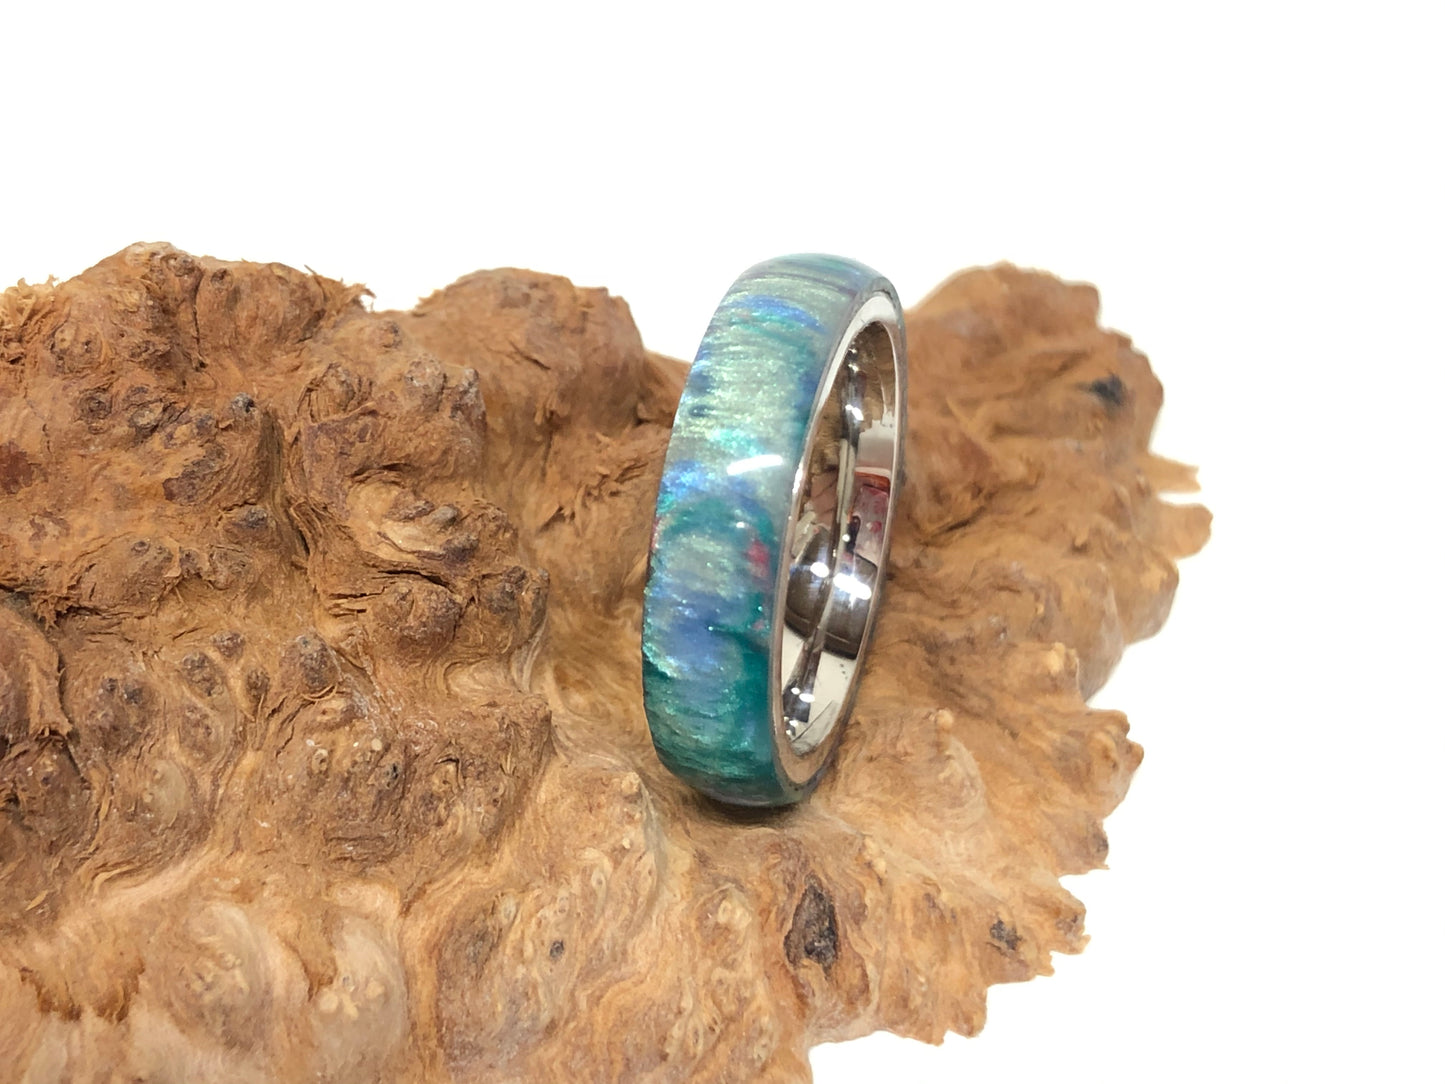 Ring / 5mm Stainless Steel - Resin / Teal Swirl - Size 6